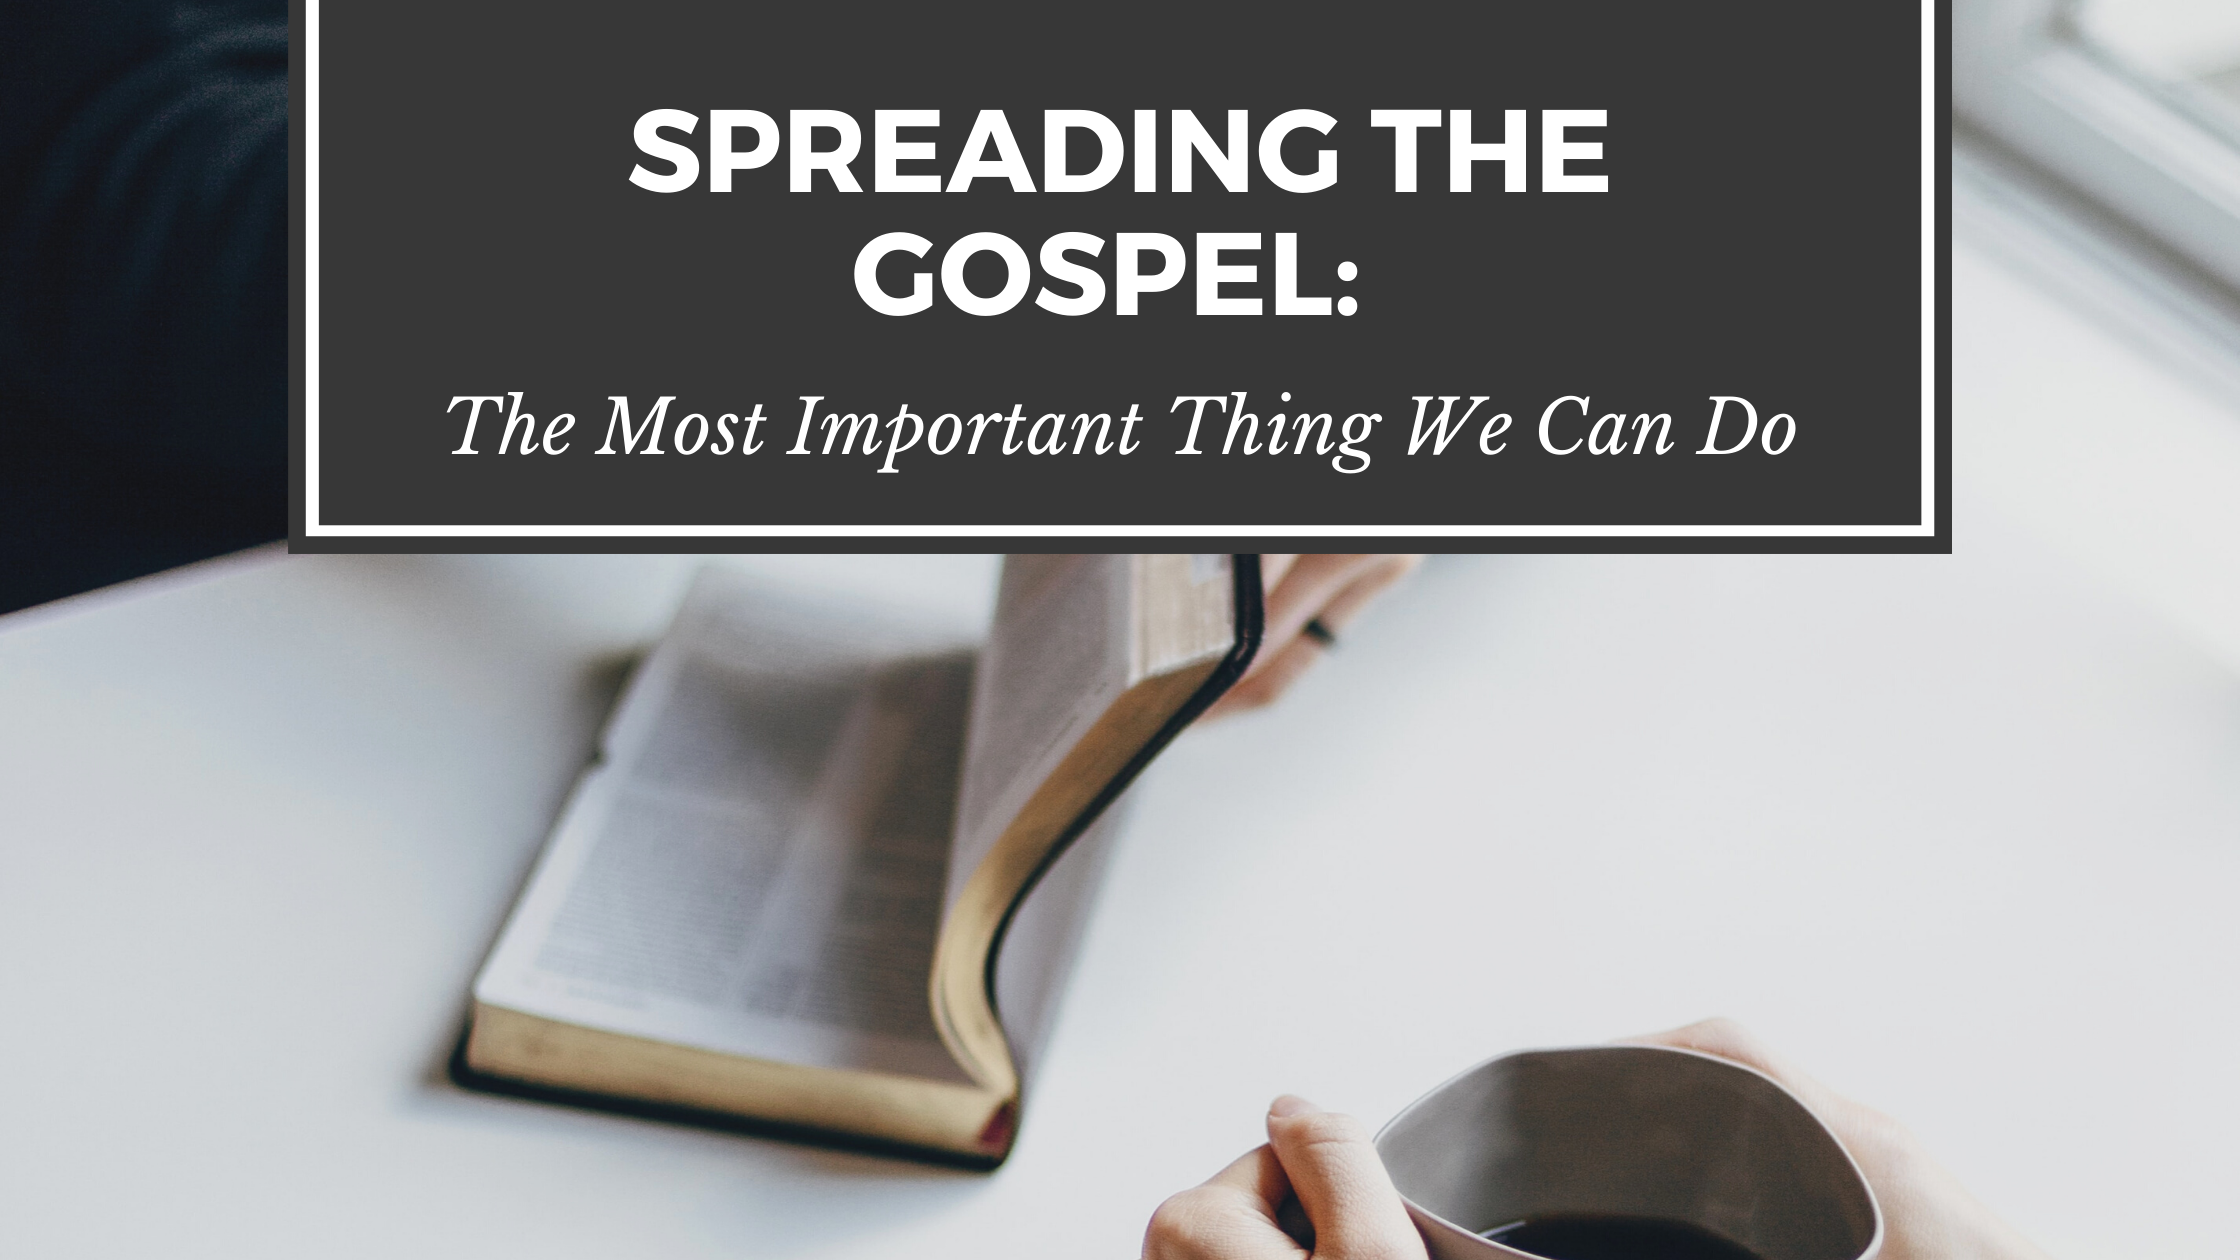 Spreading the Gospel Blog title with Bible in background